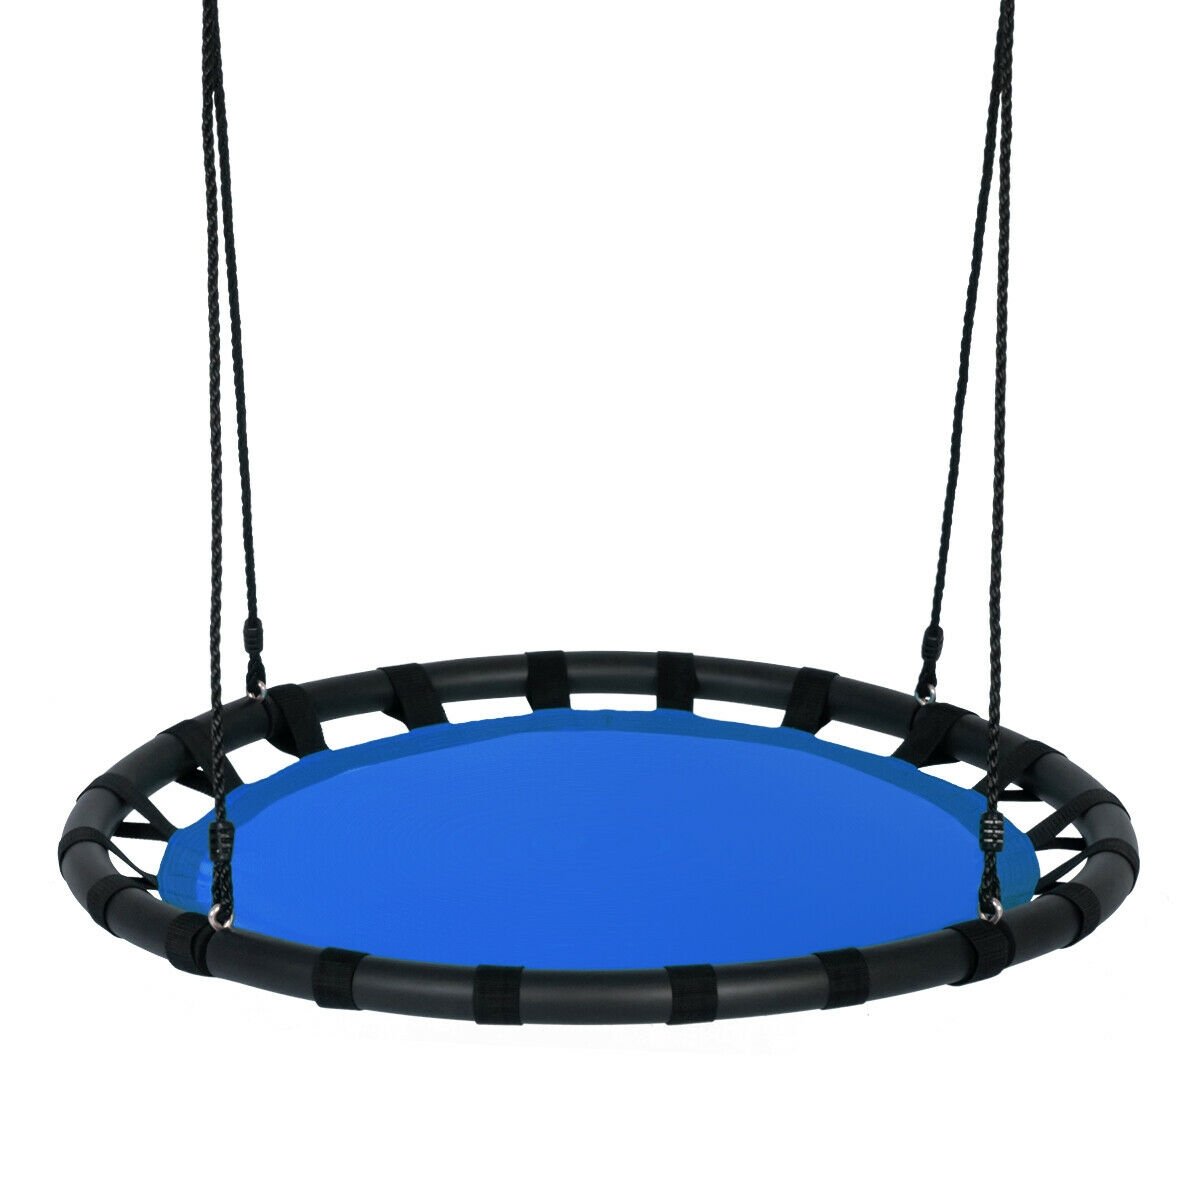 40" Flying Saucer Round Swing Kids Play Set, Blue - Gallery Canada